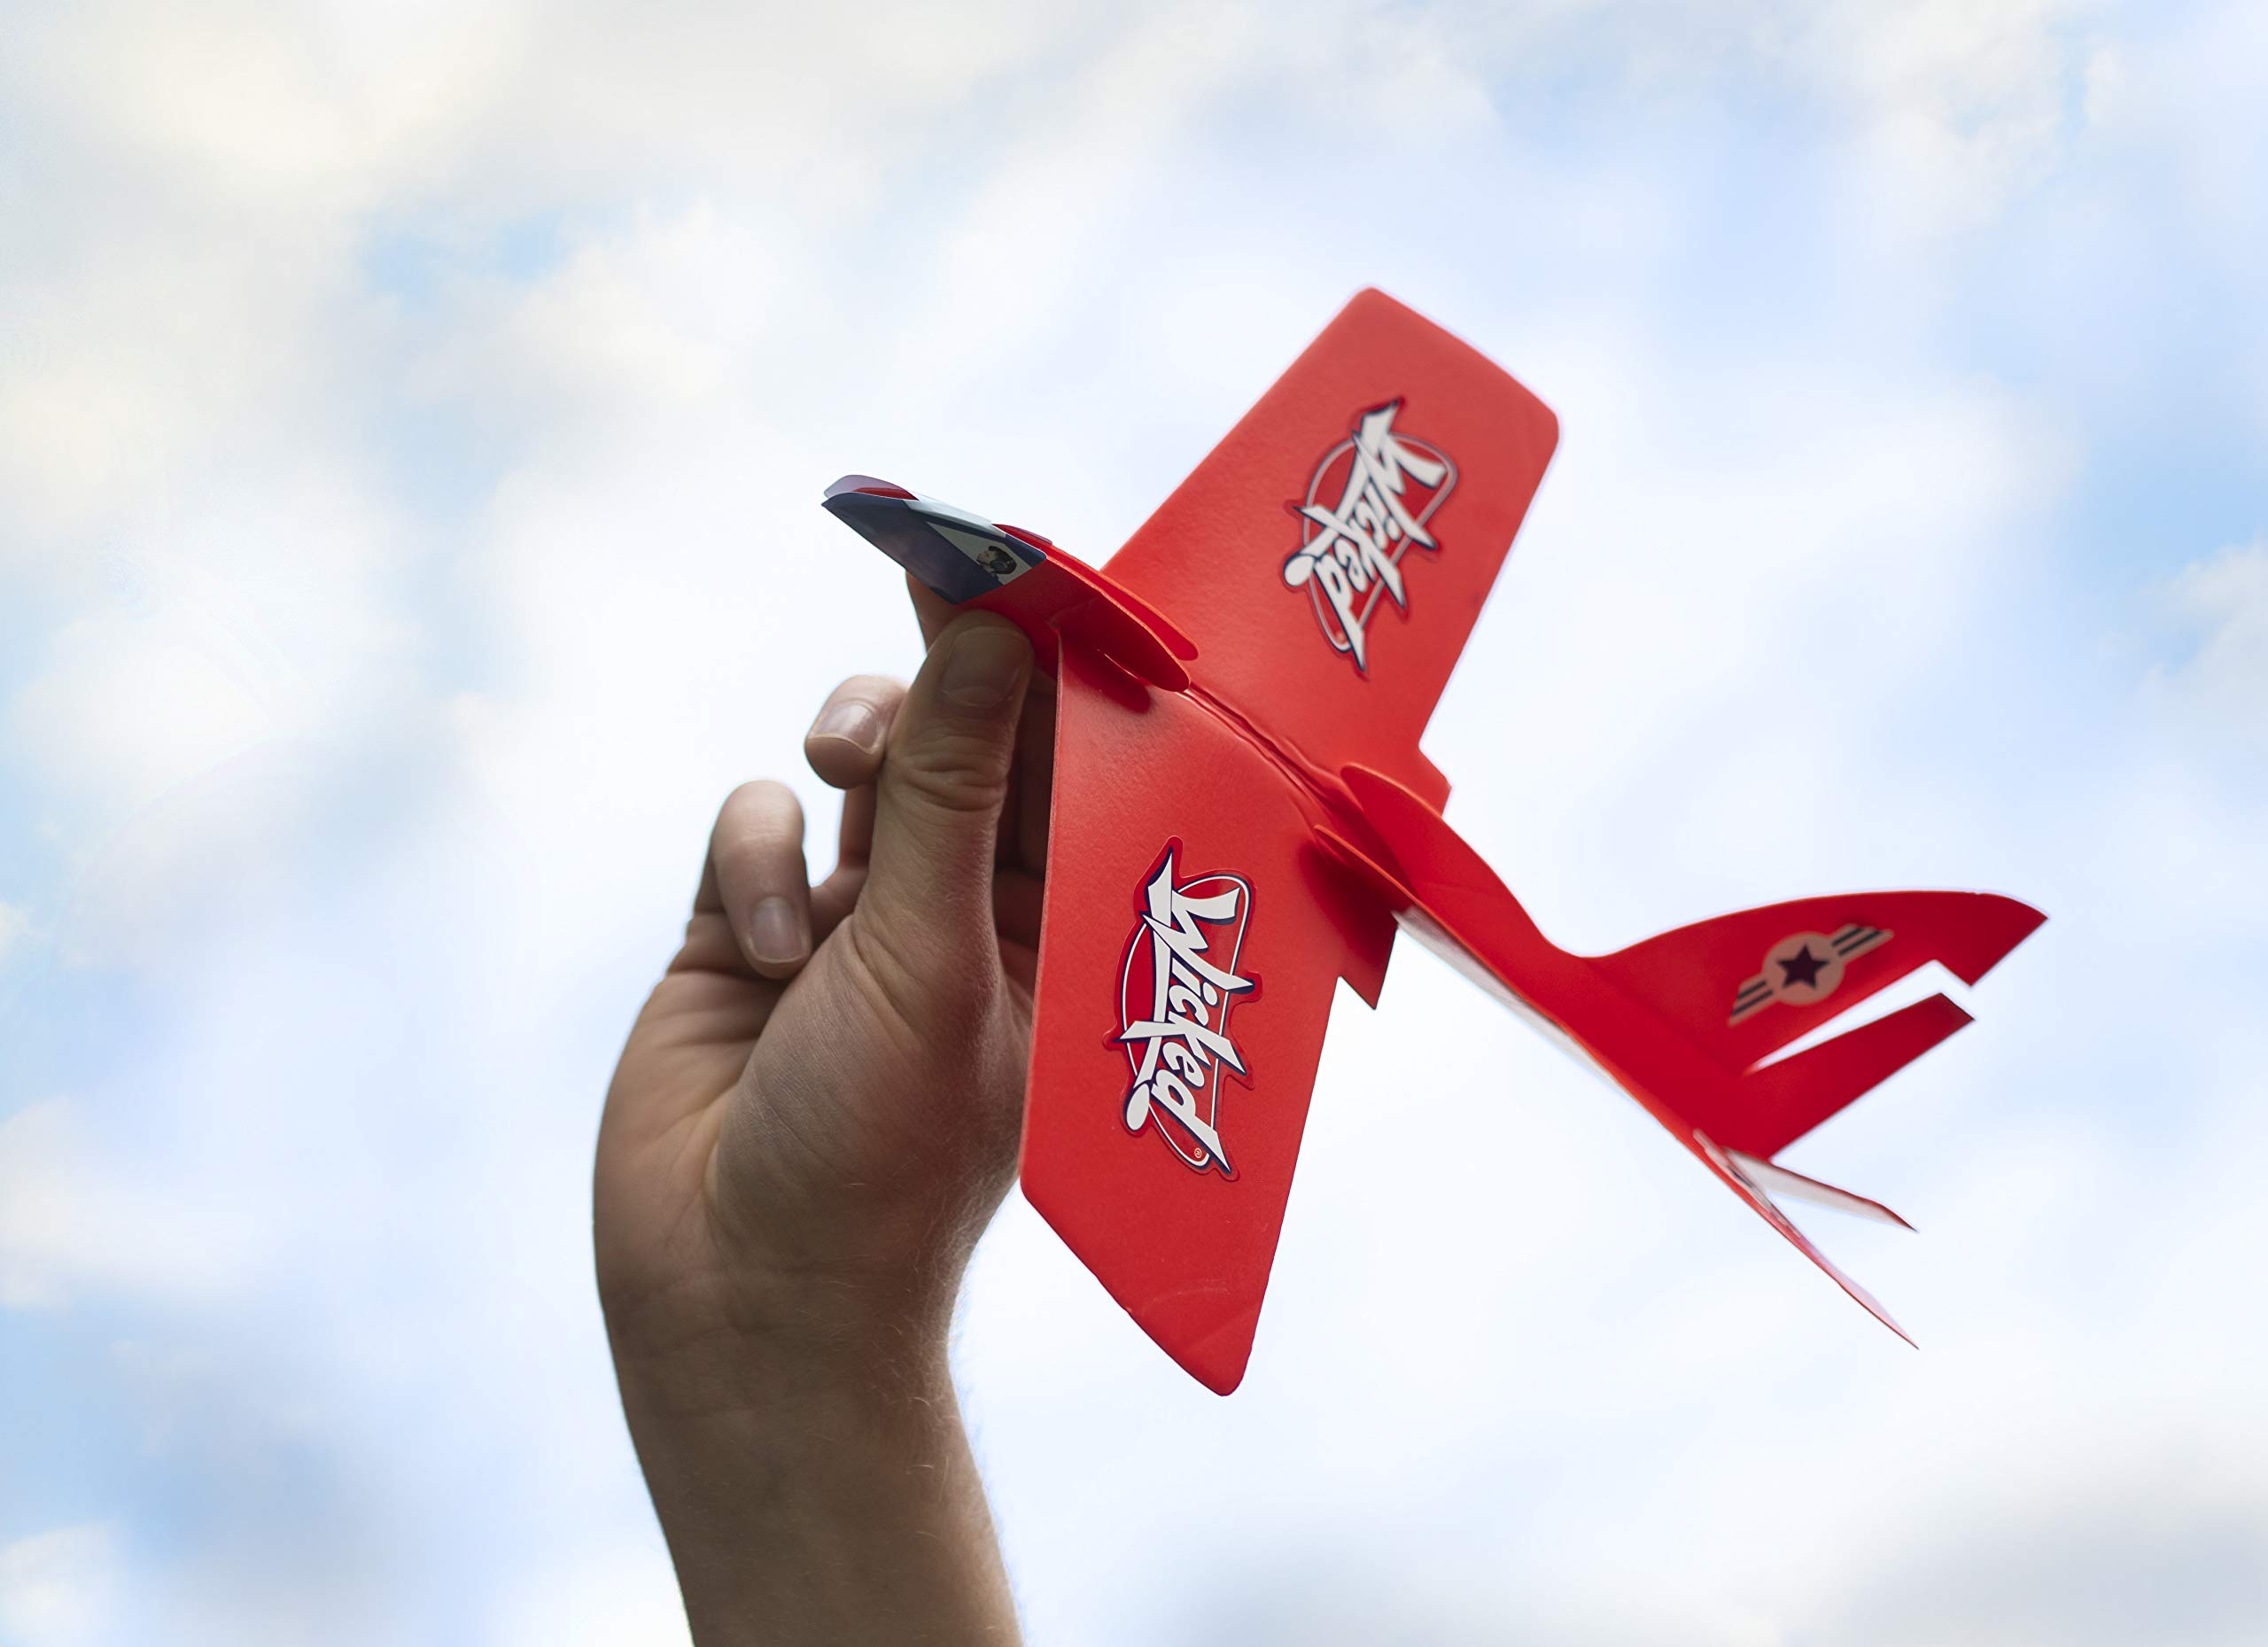 Wicked Microjet | The Flying, Returning Boomerang Stunt Plane by Wicked Vision | Made from Soft Foam for Safe Indoor Play | 4 Metre Flight Range